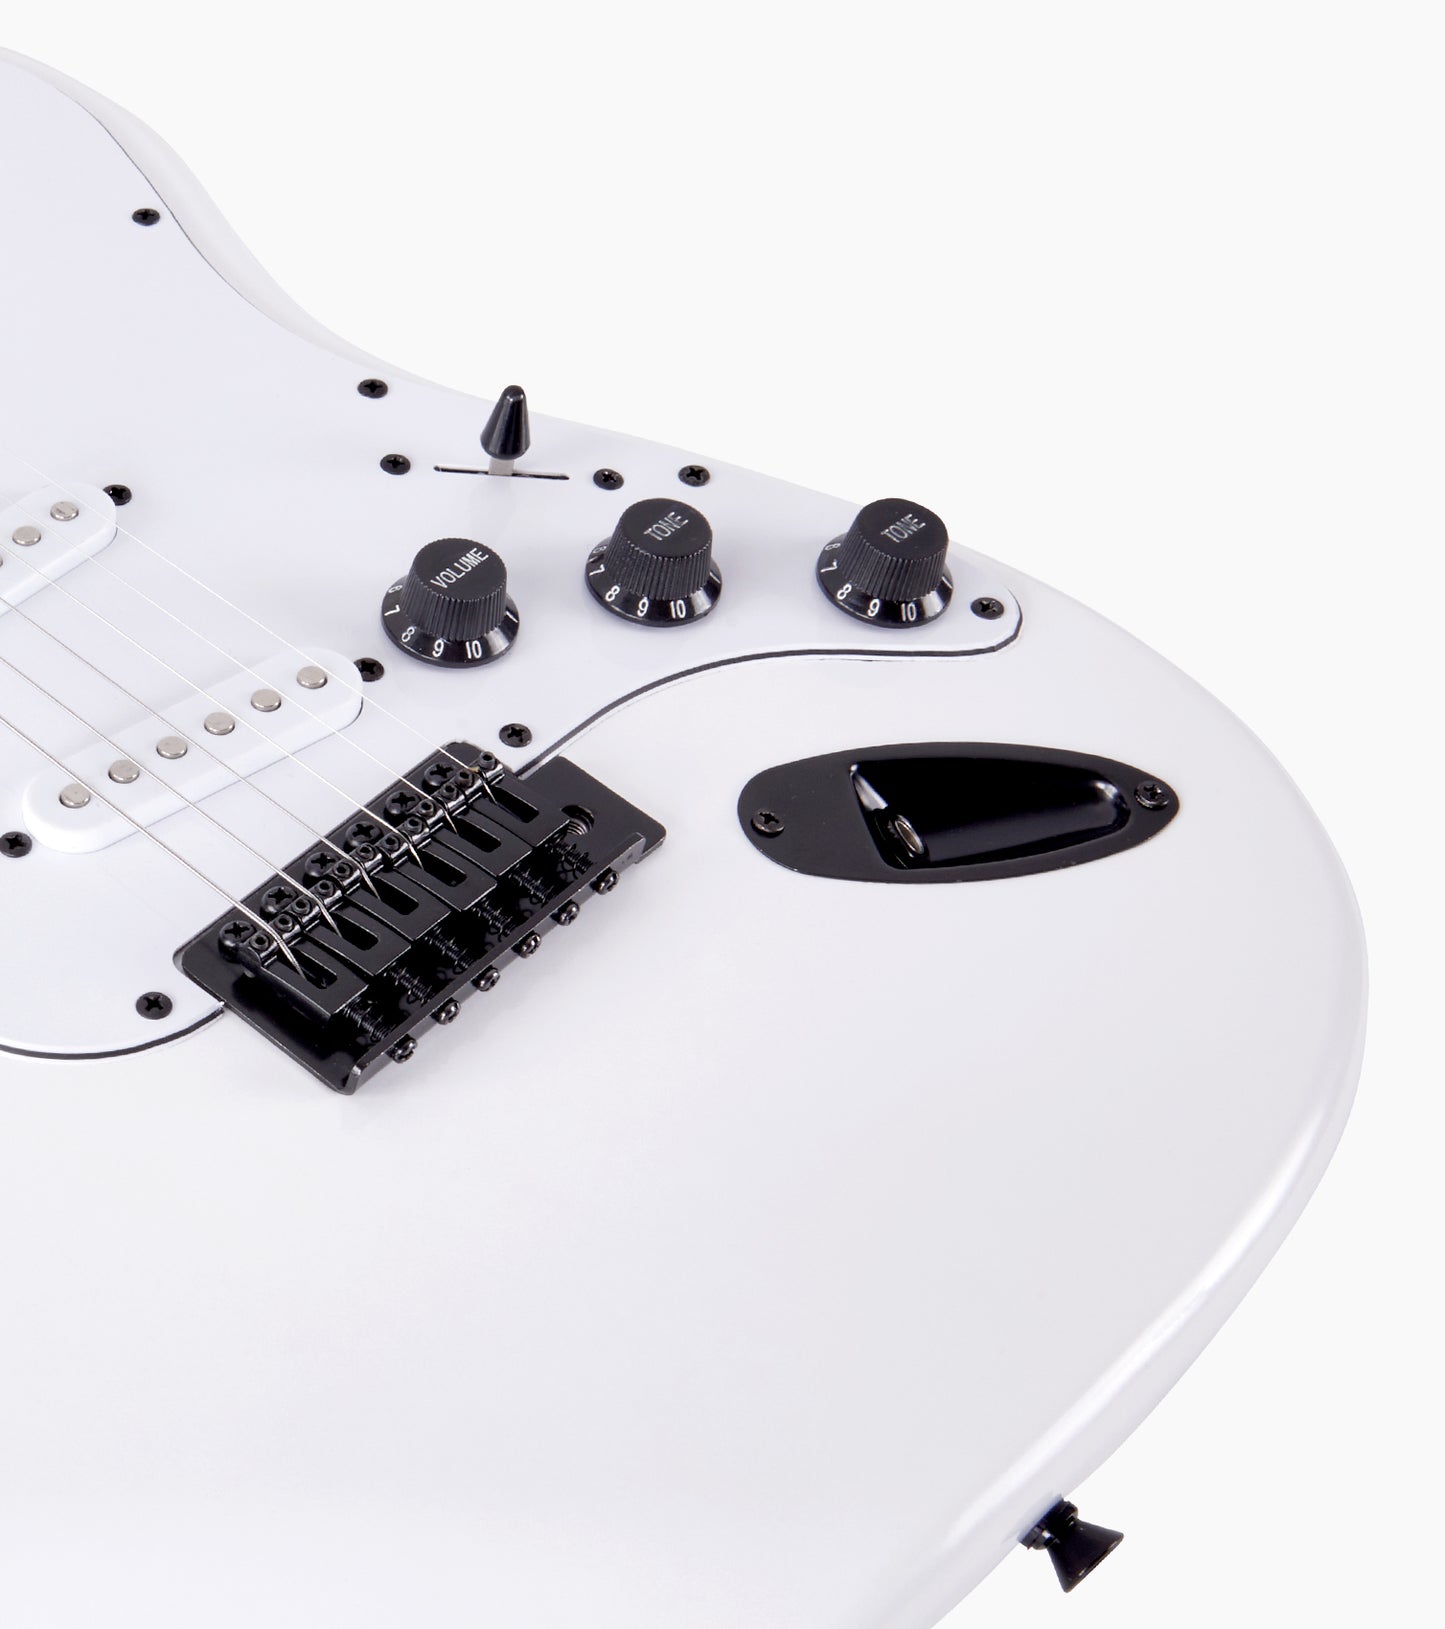 close-up of White double-cutaway beginner electric guitar